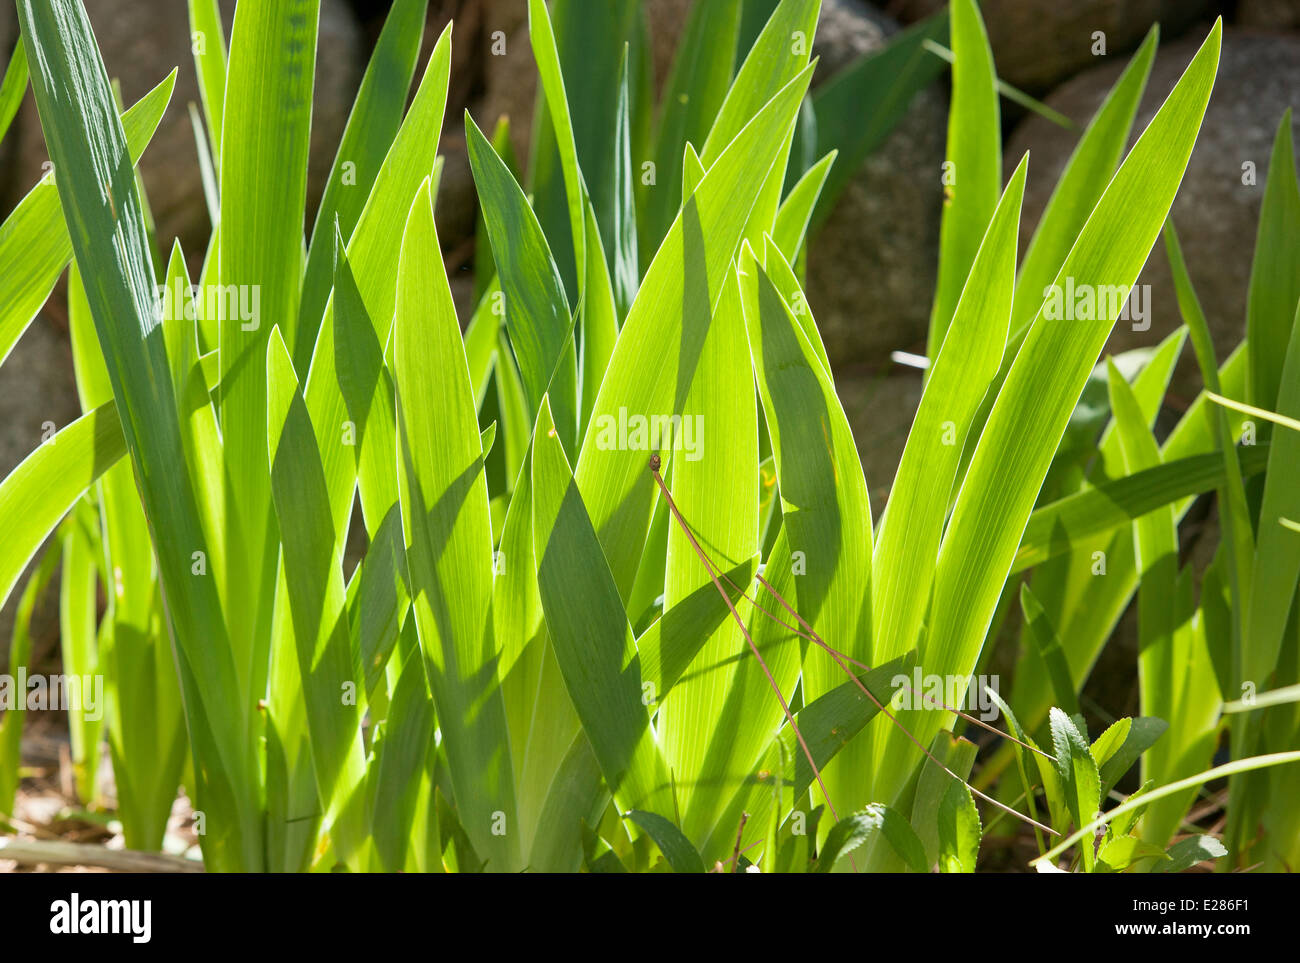 The abstract pattern of back lit plant leaves. Stock Photo